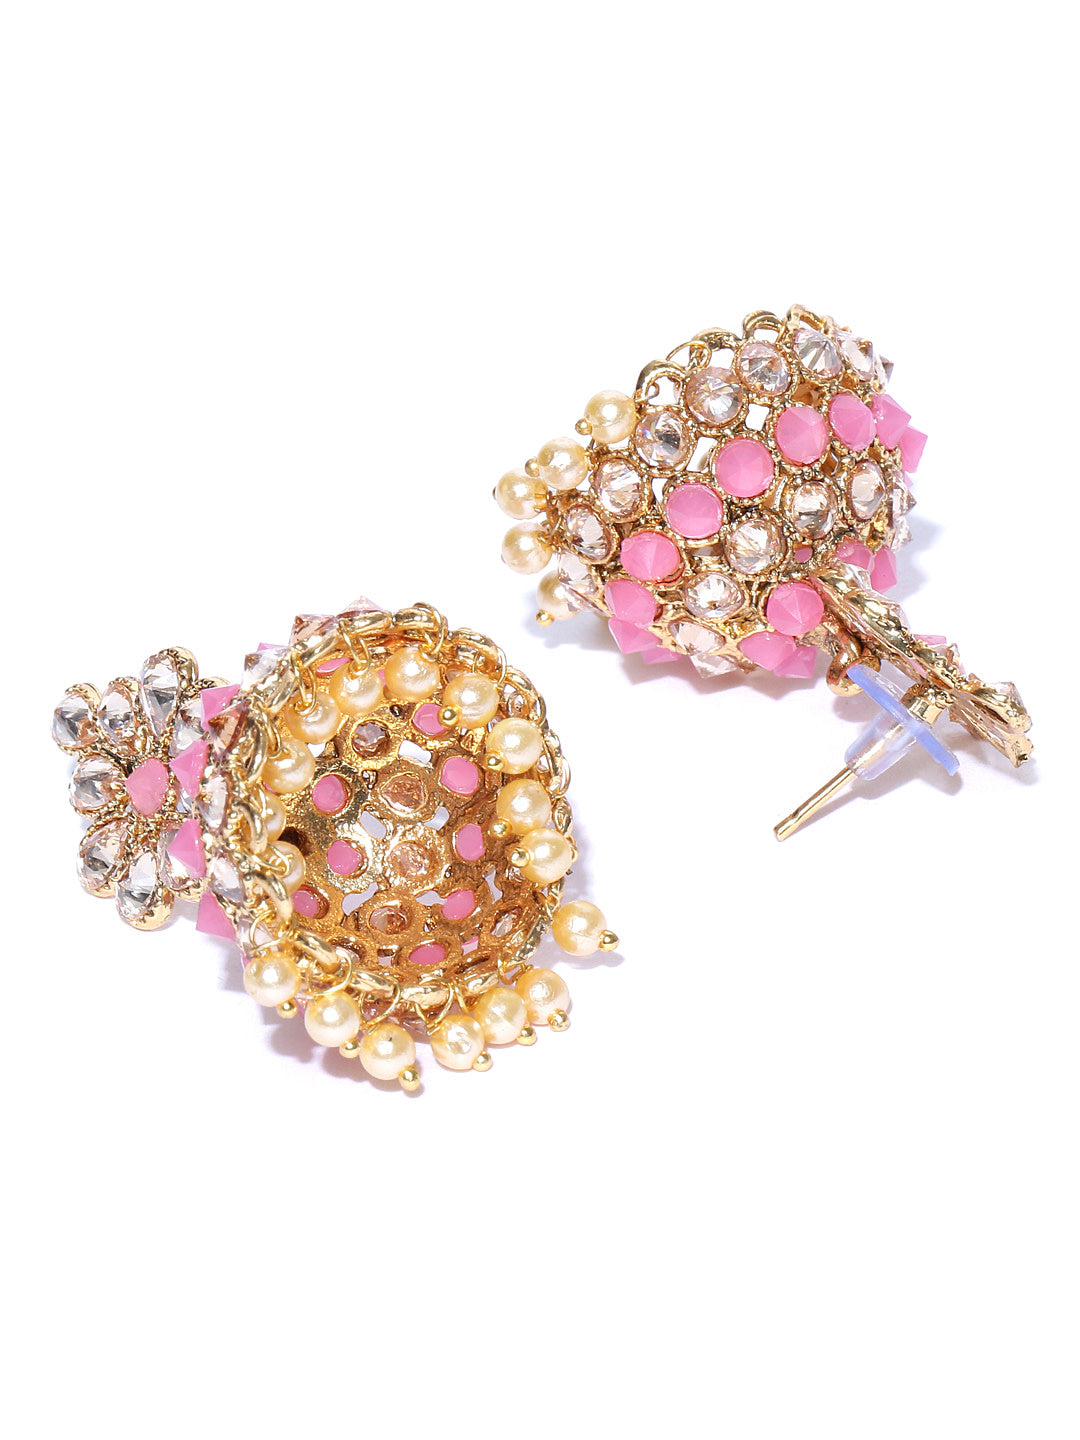 Pink Gold-Plated Stones Studded Floral Patterned Jhumka Earrings in Pink and White Color